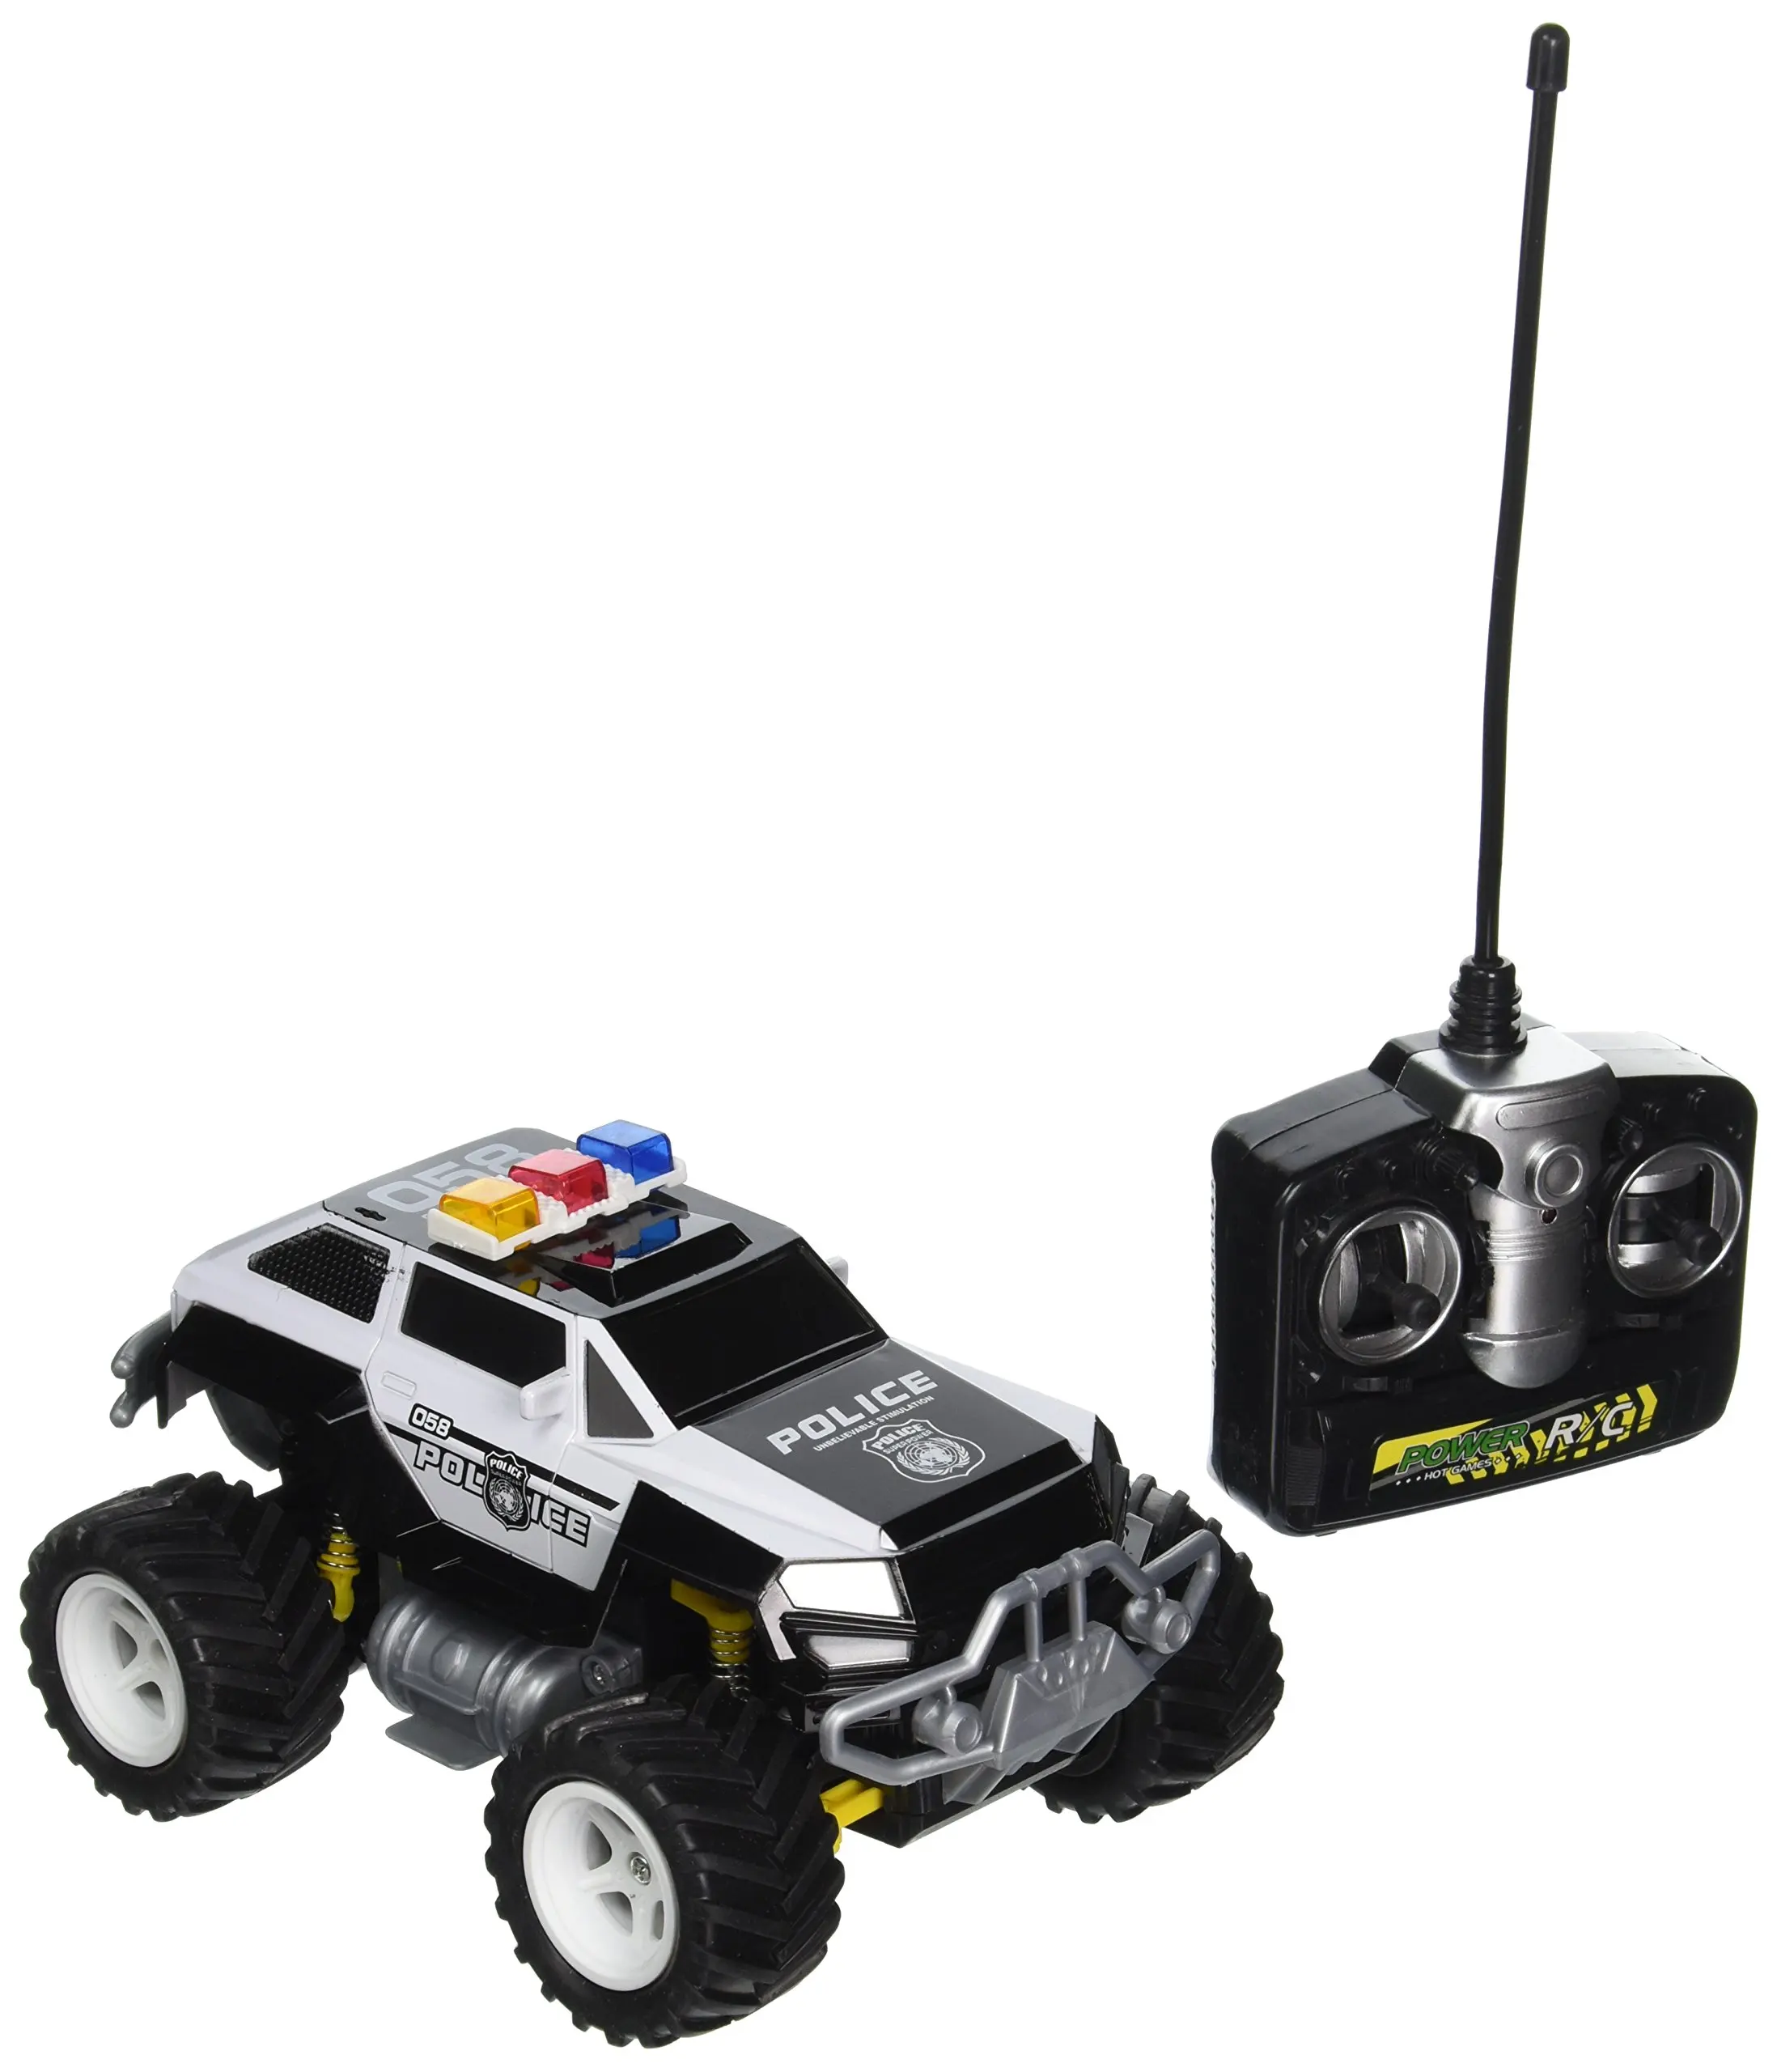 monster police car toy